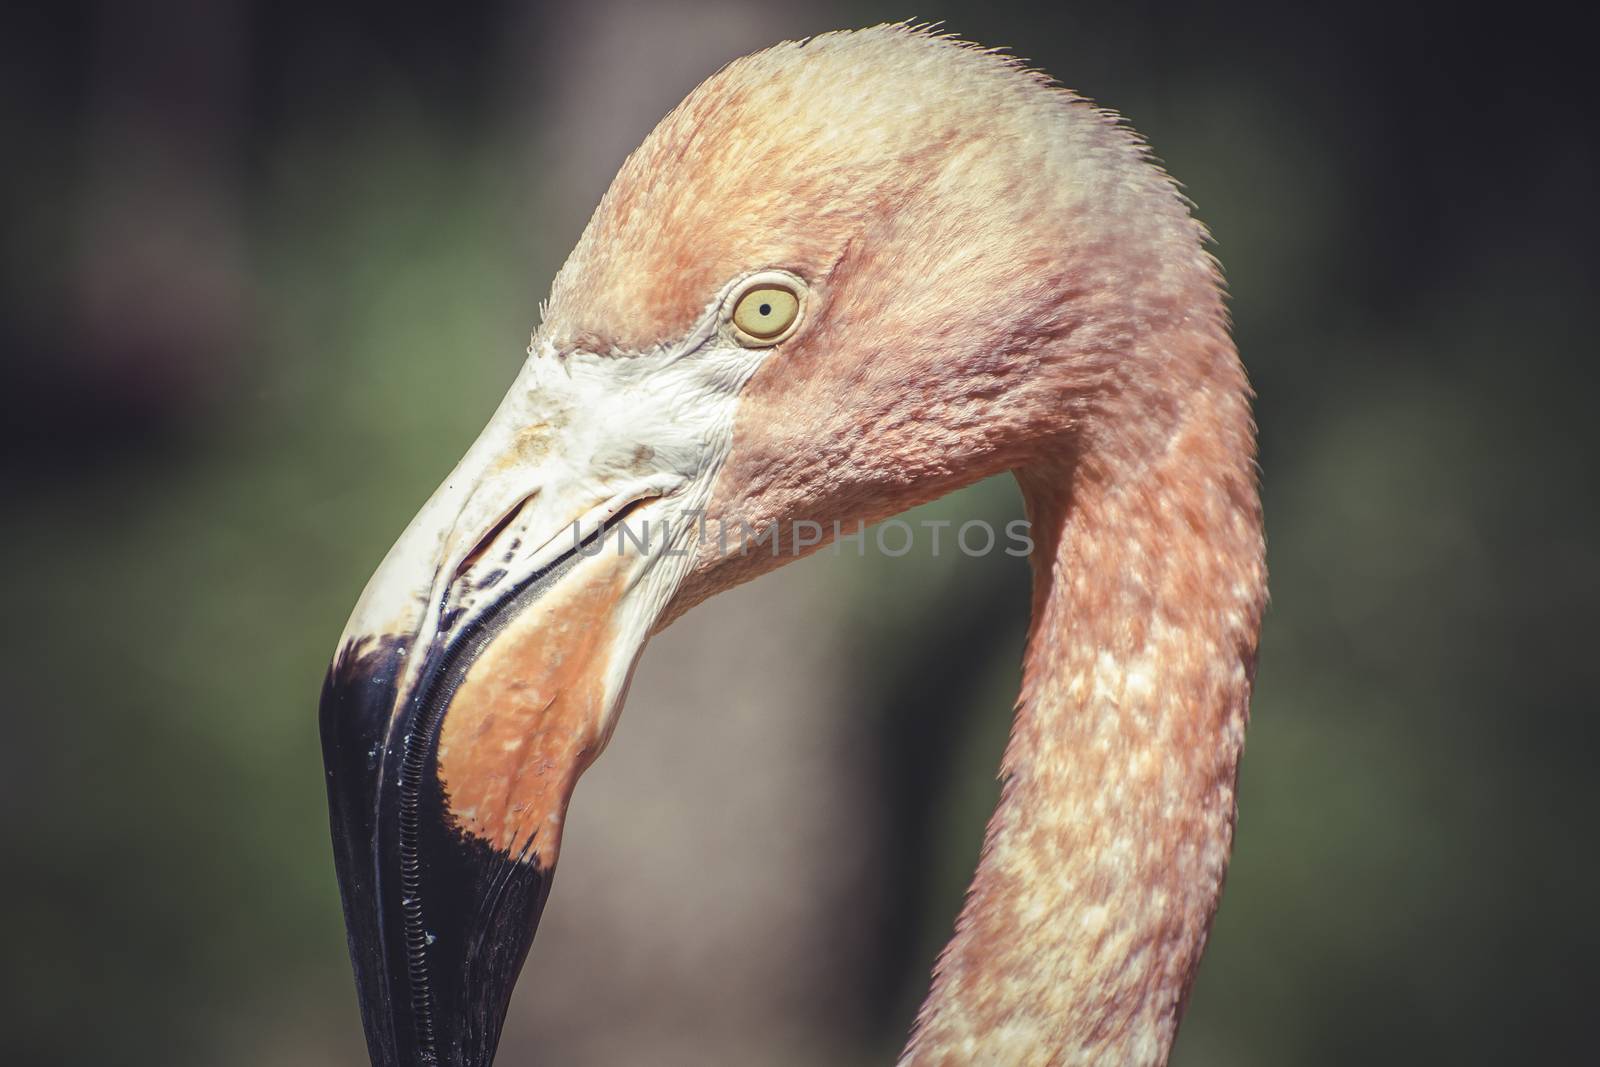 caribbean, detail of flamingo head with long neck by FernandoCortes